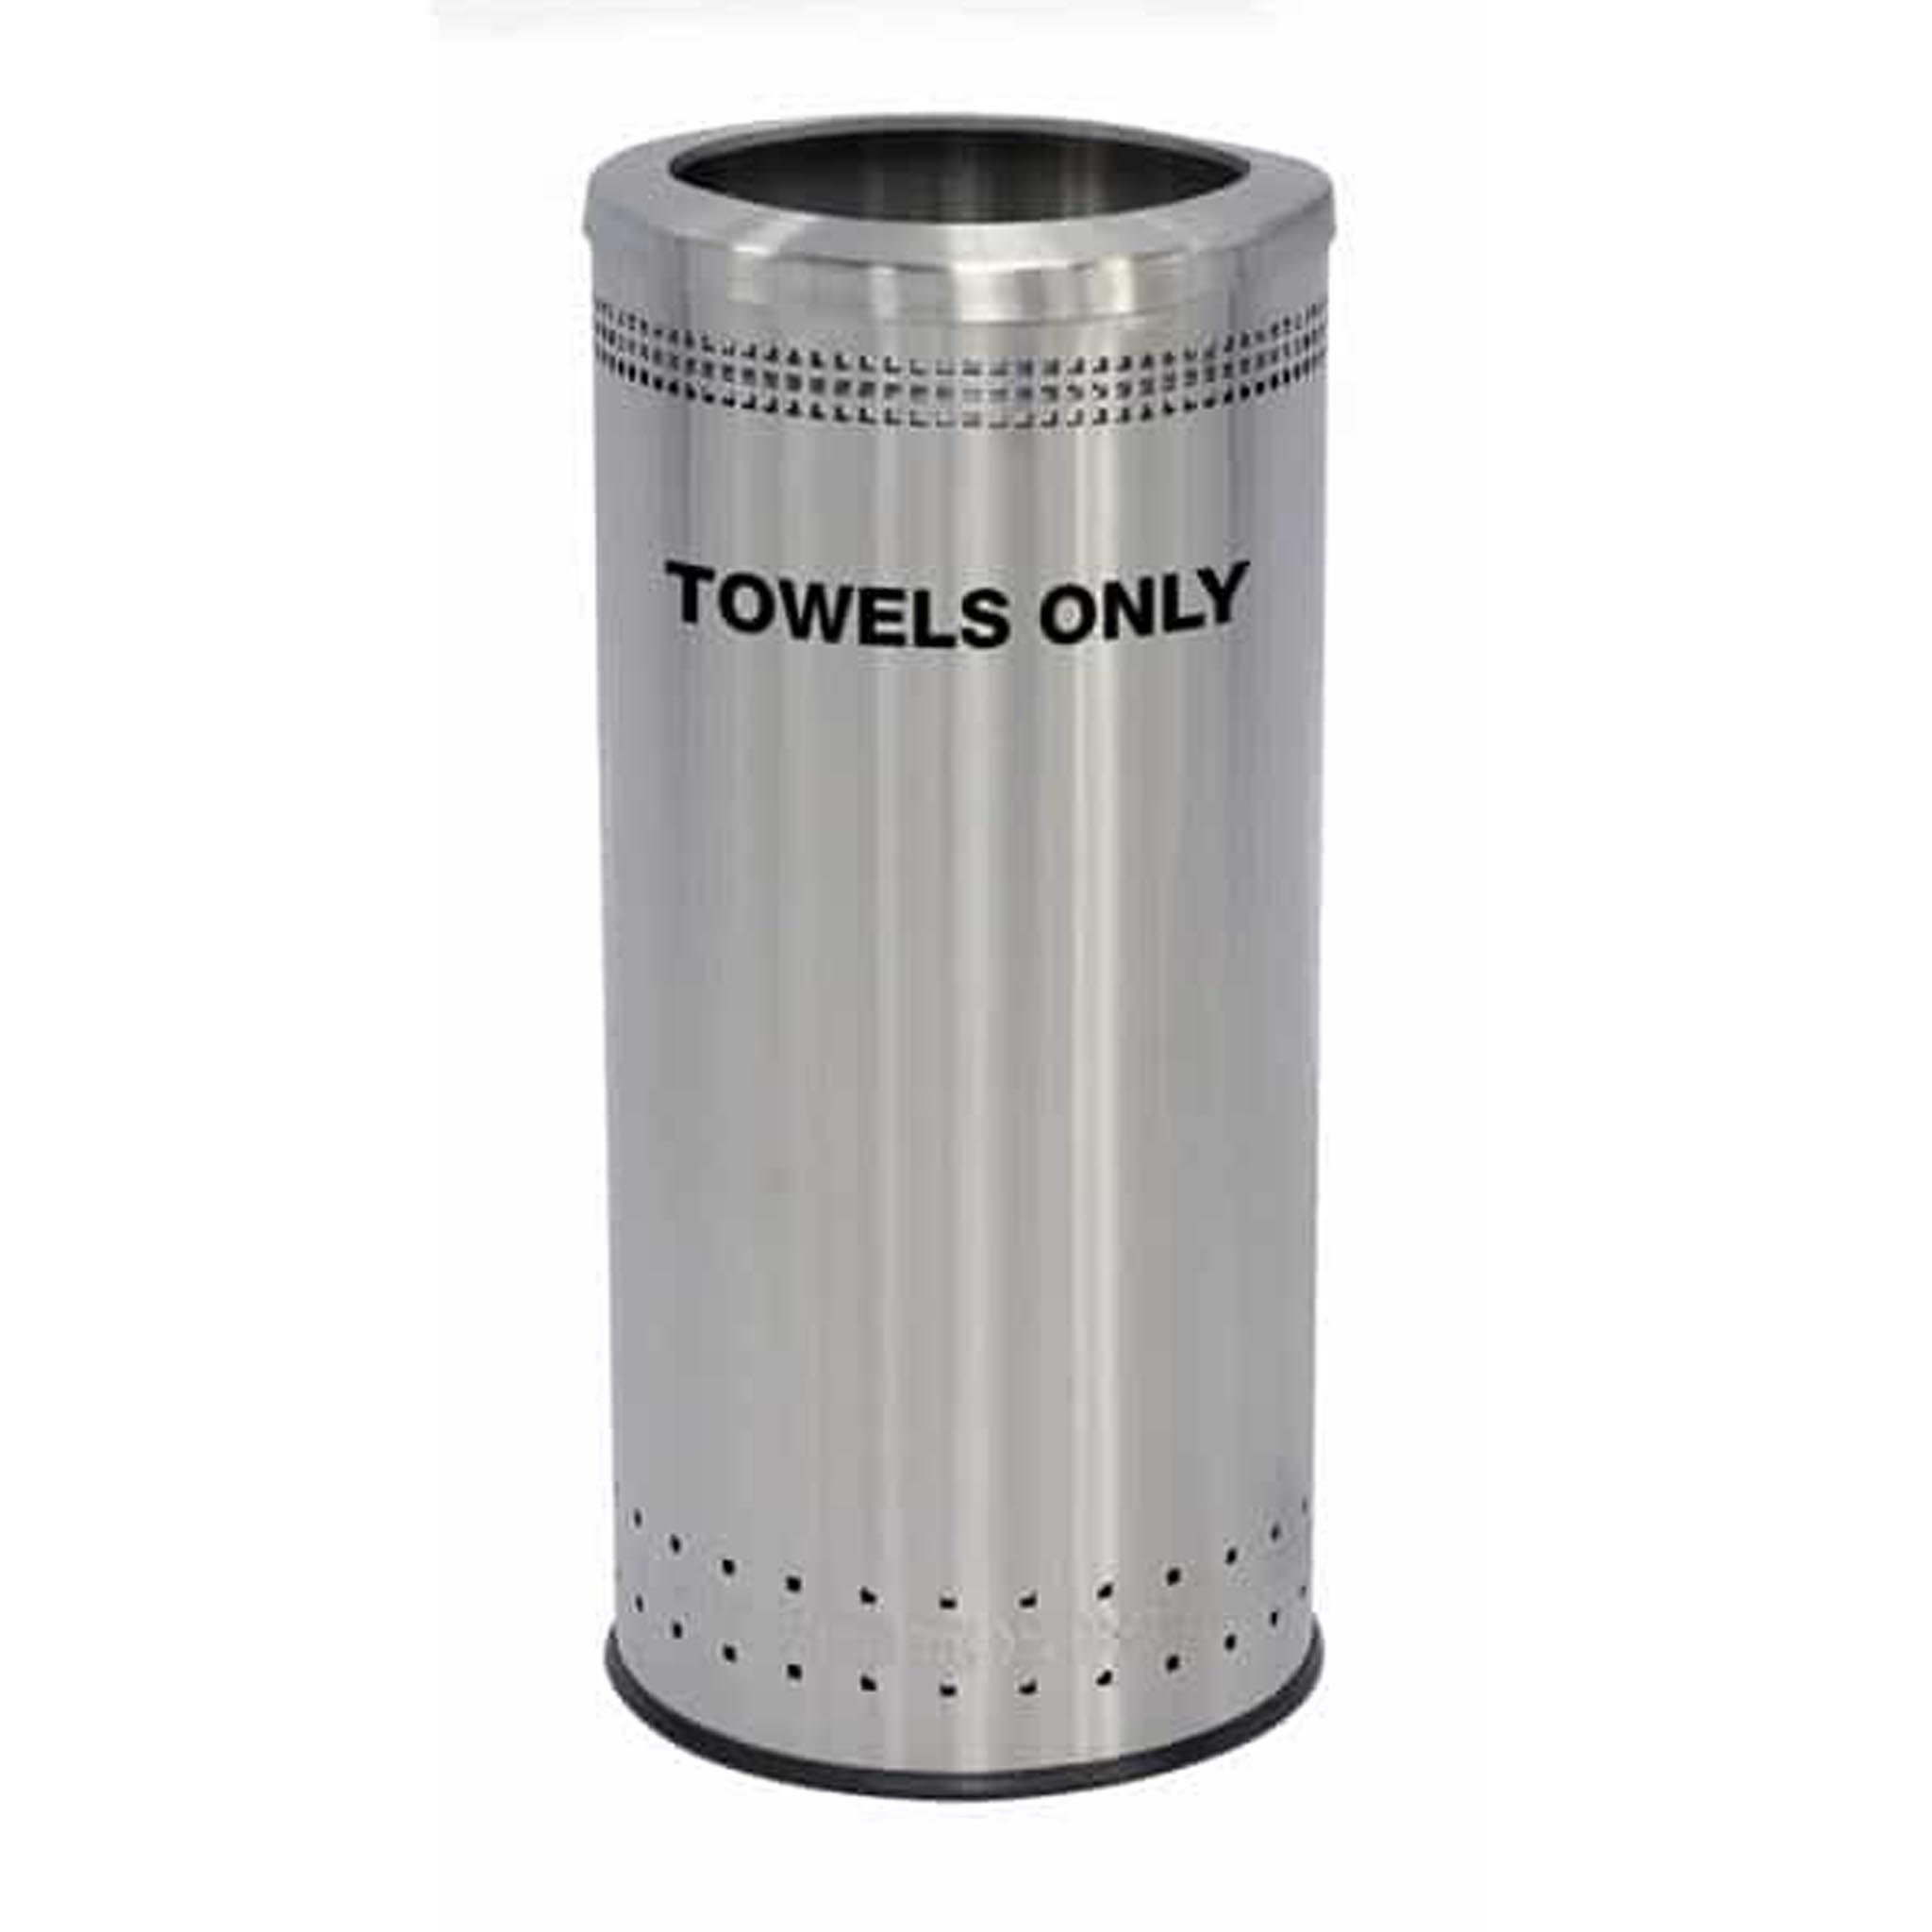 http://www.commercialzone.com/wp-content/uploads/2020/04/78282999-Precision-Series-25-Gallon-Imprinted-Towel-Bin-Stainless-Steel-Studio-Image-1.jpg